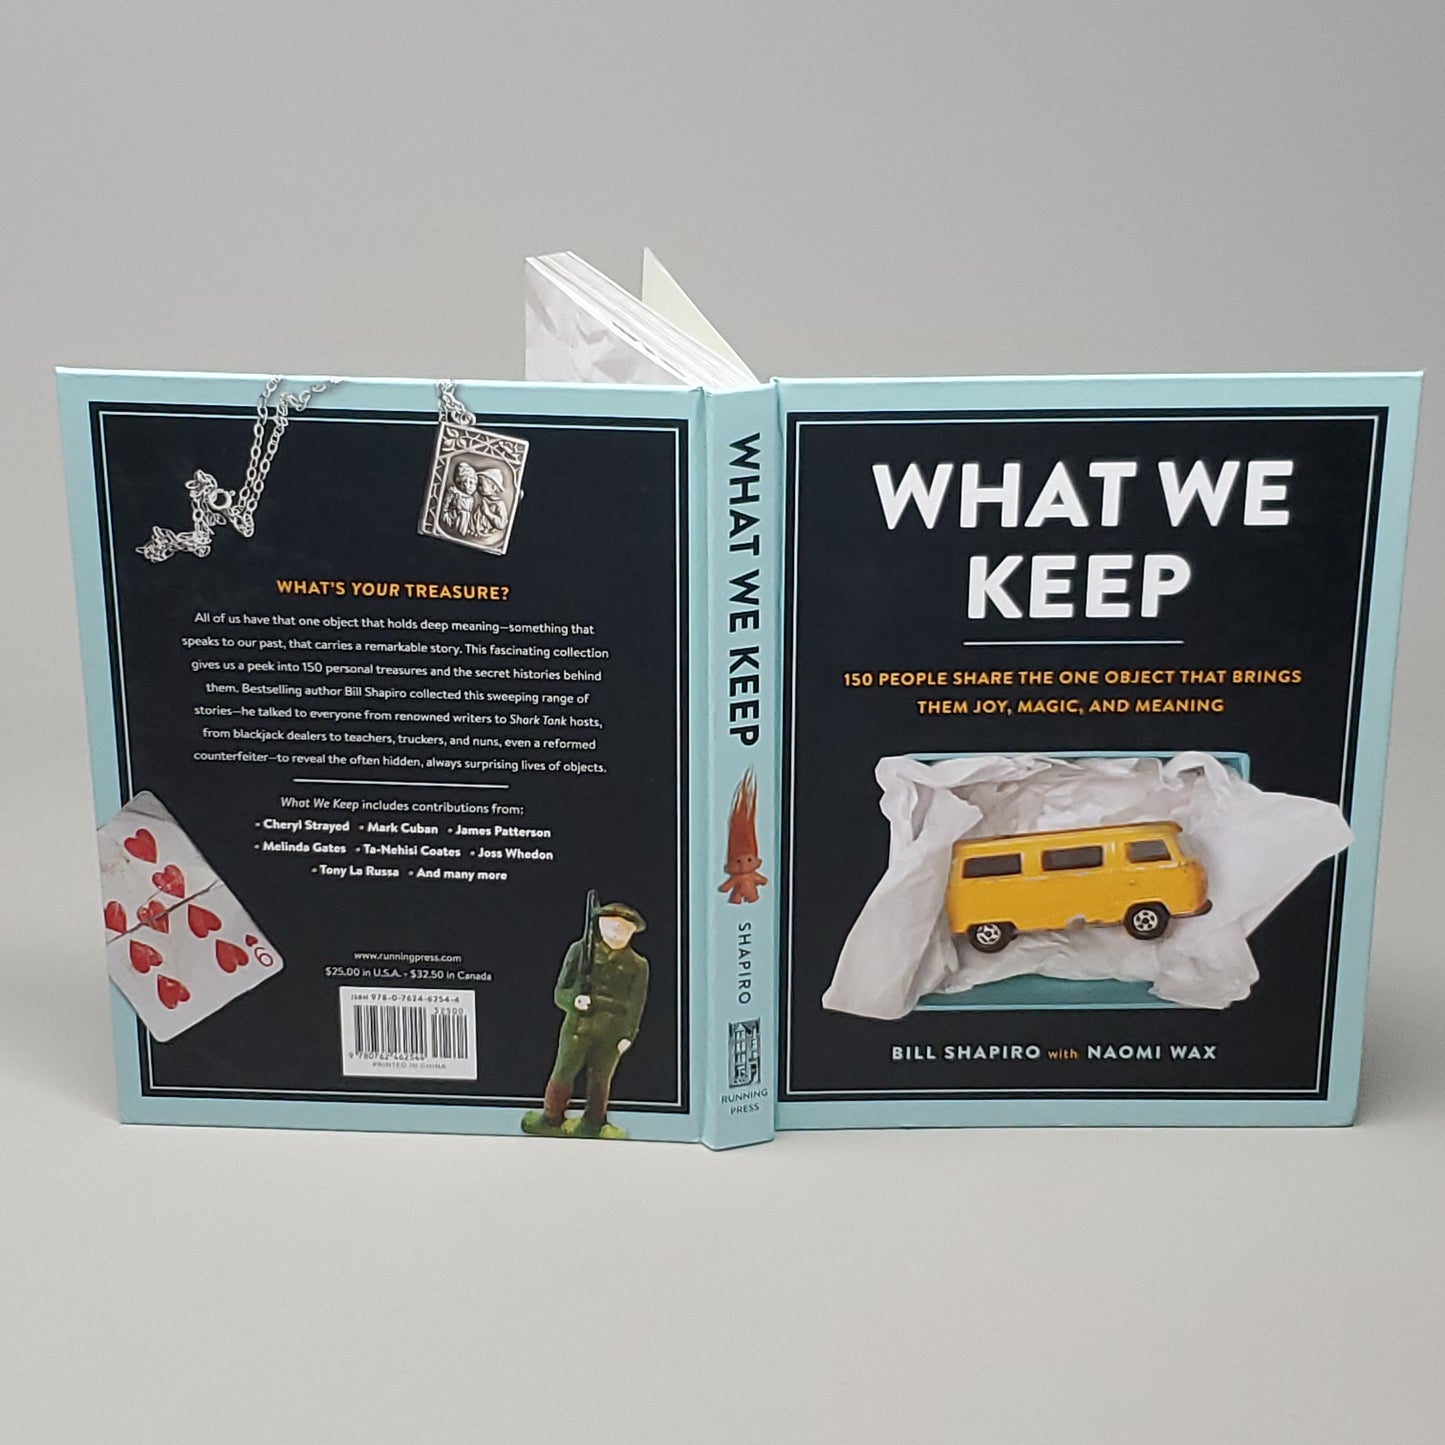 What We Keep by Bill Shapiro & Naomi Wax Hardcover (New With Damage)